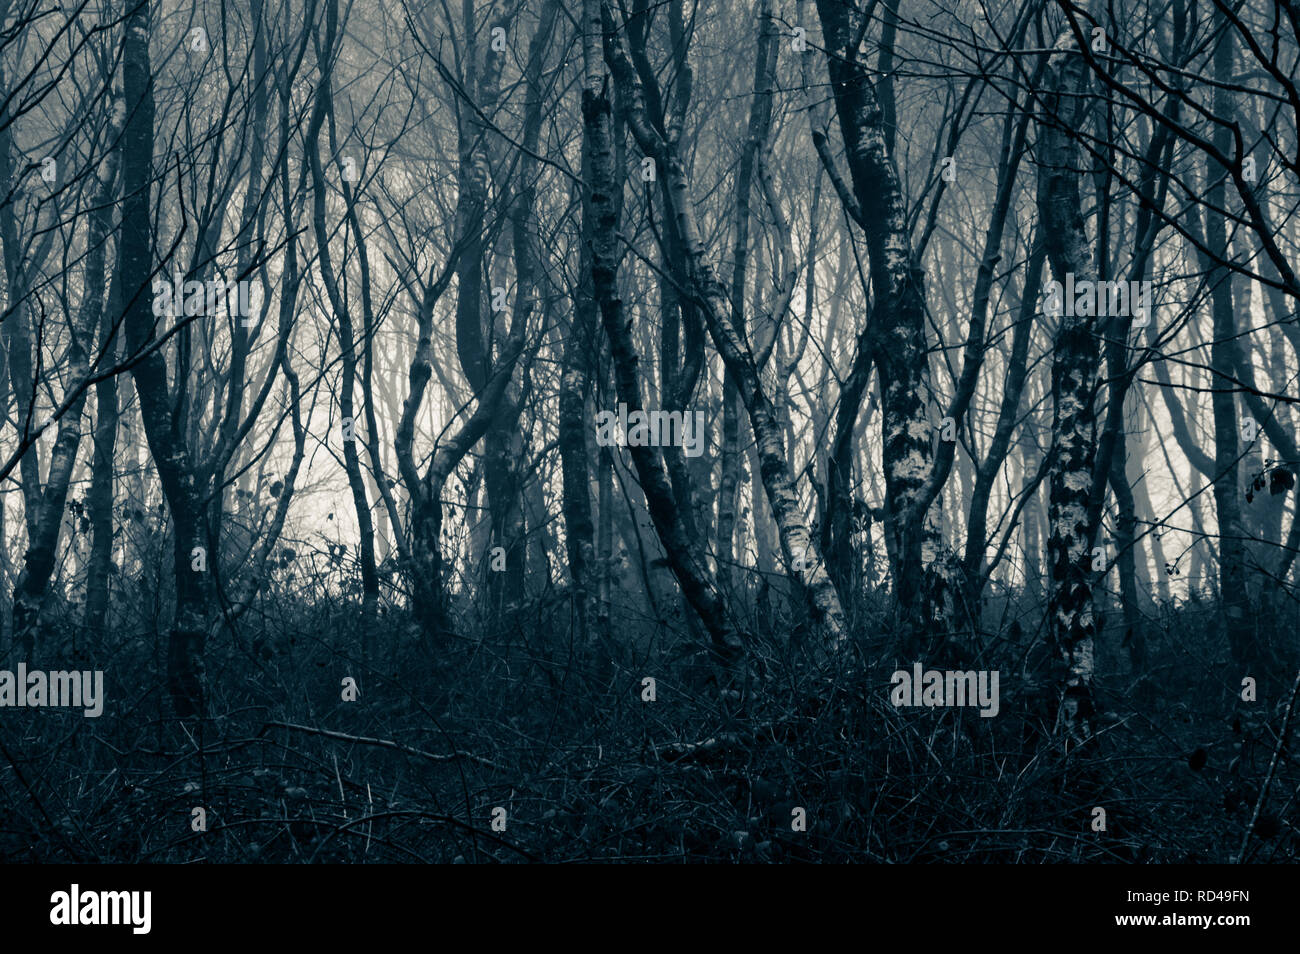 A dark spooky forest of birch trees in winter. With a cold blue edit. Stock Photo